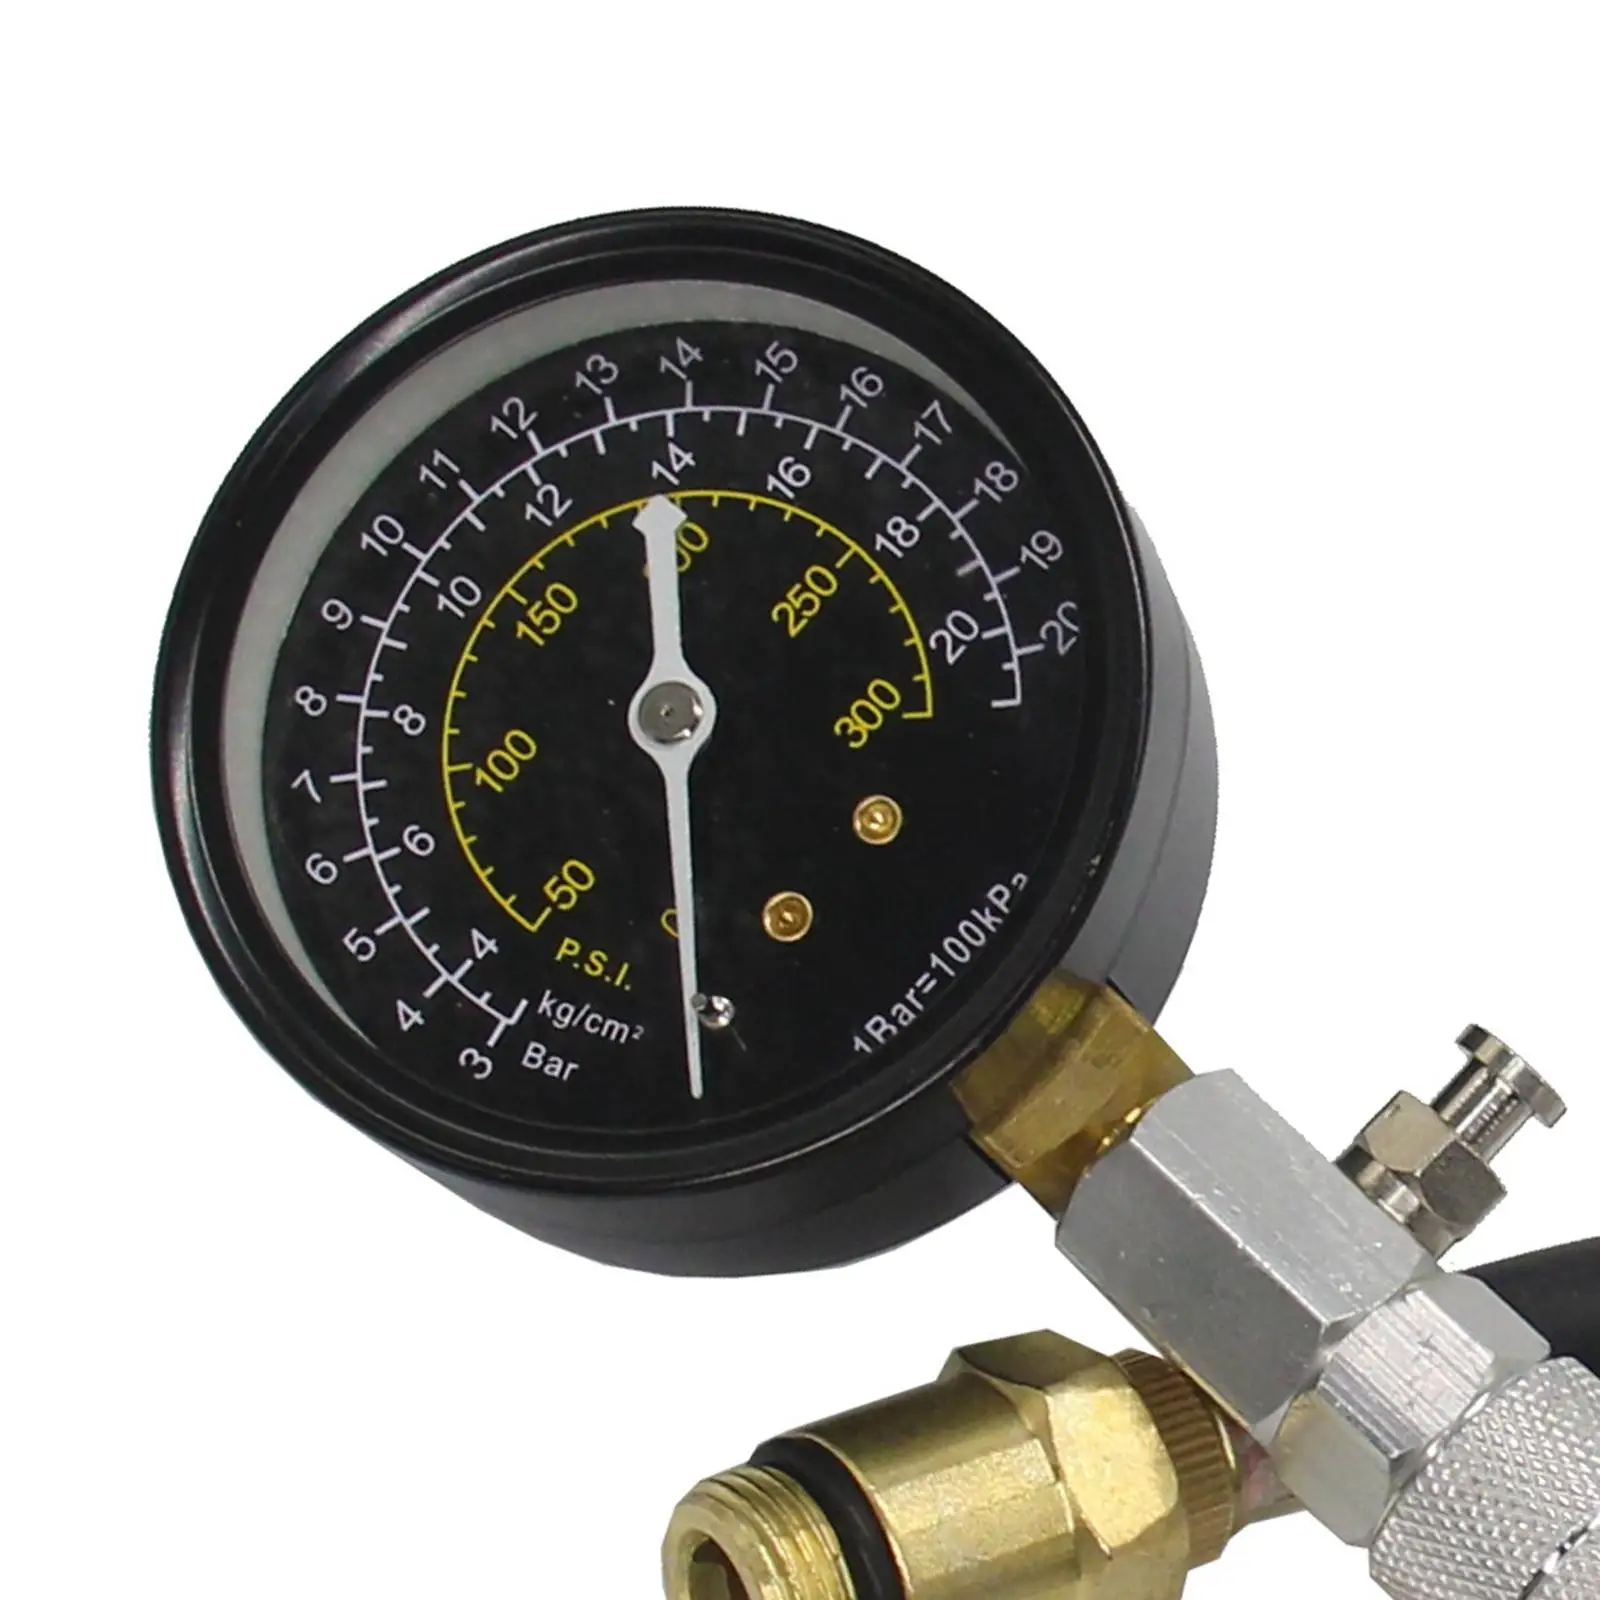 Compression Kit 300 PSI Check Test Meter Auto 2000Kpa Pressure for Motorcycle